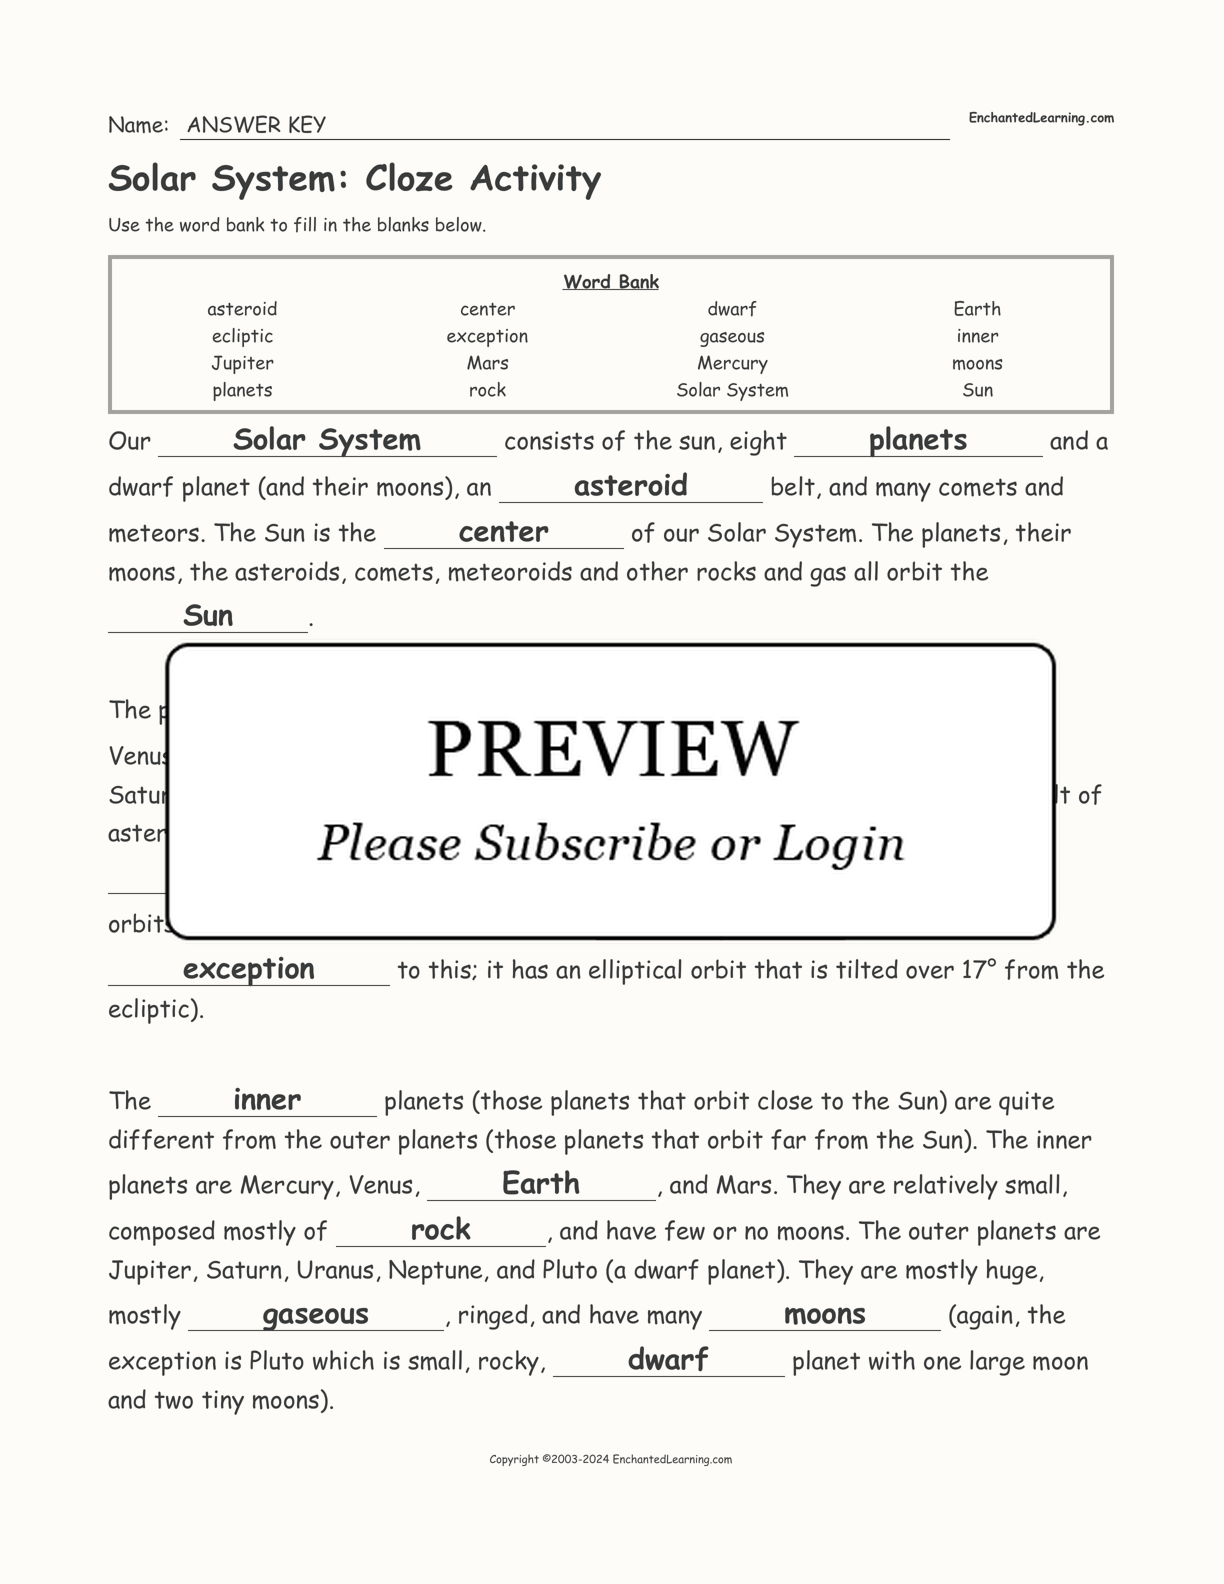 Solar System: Cloze Activity interactive worksheet page 2